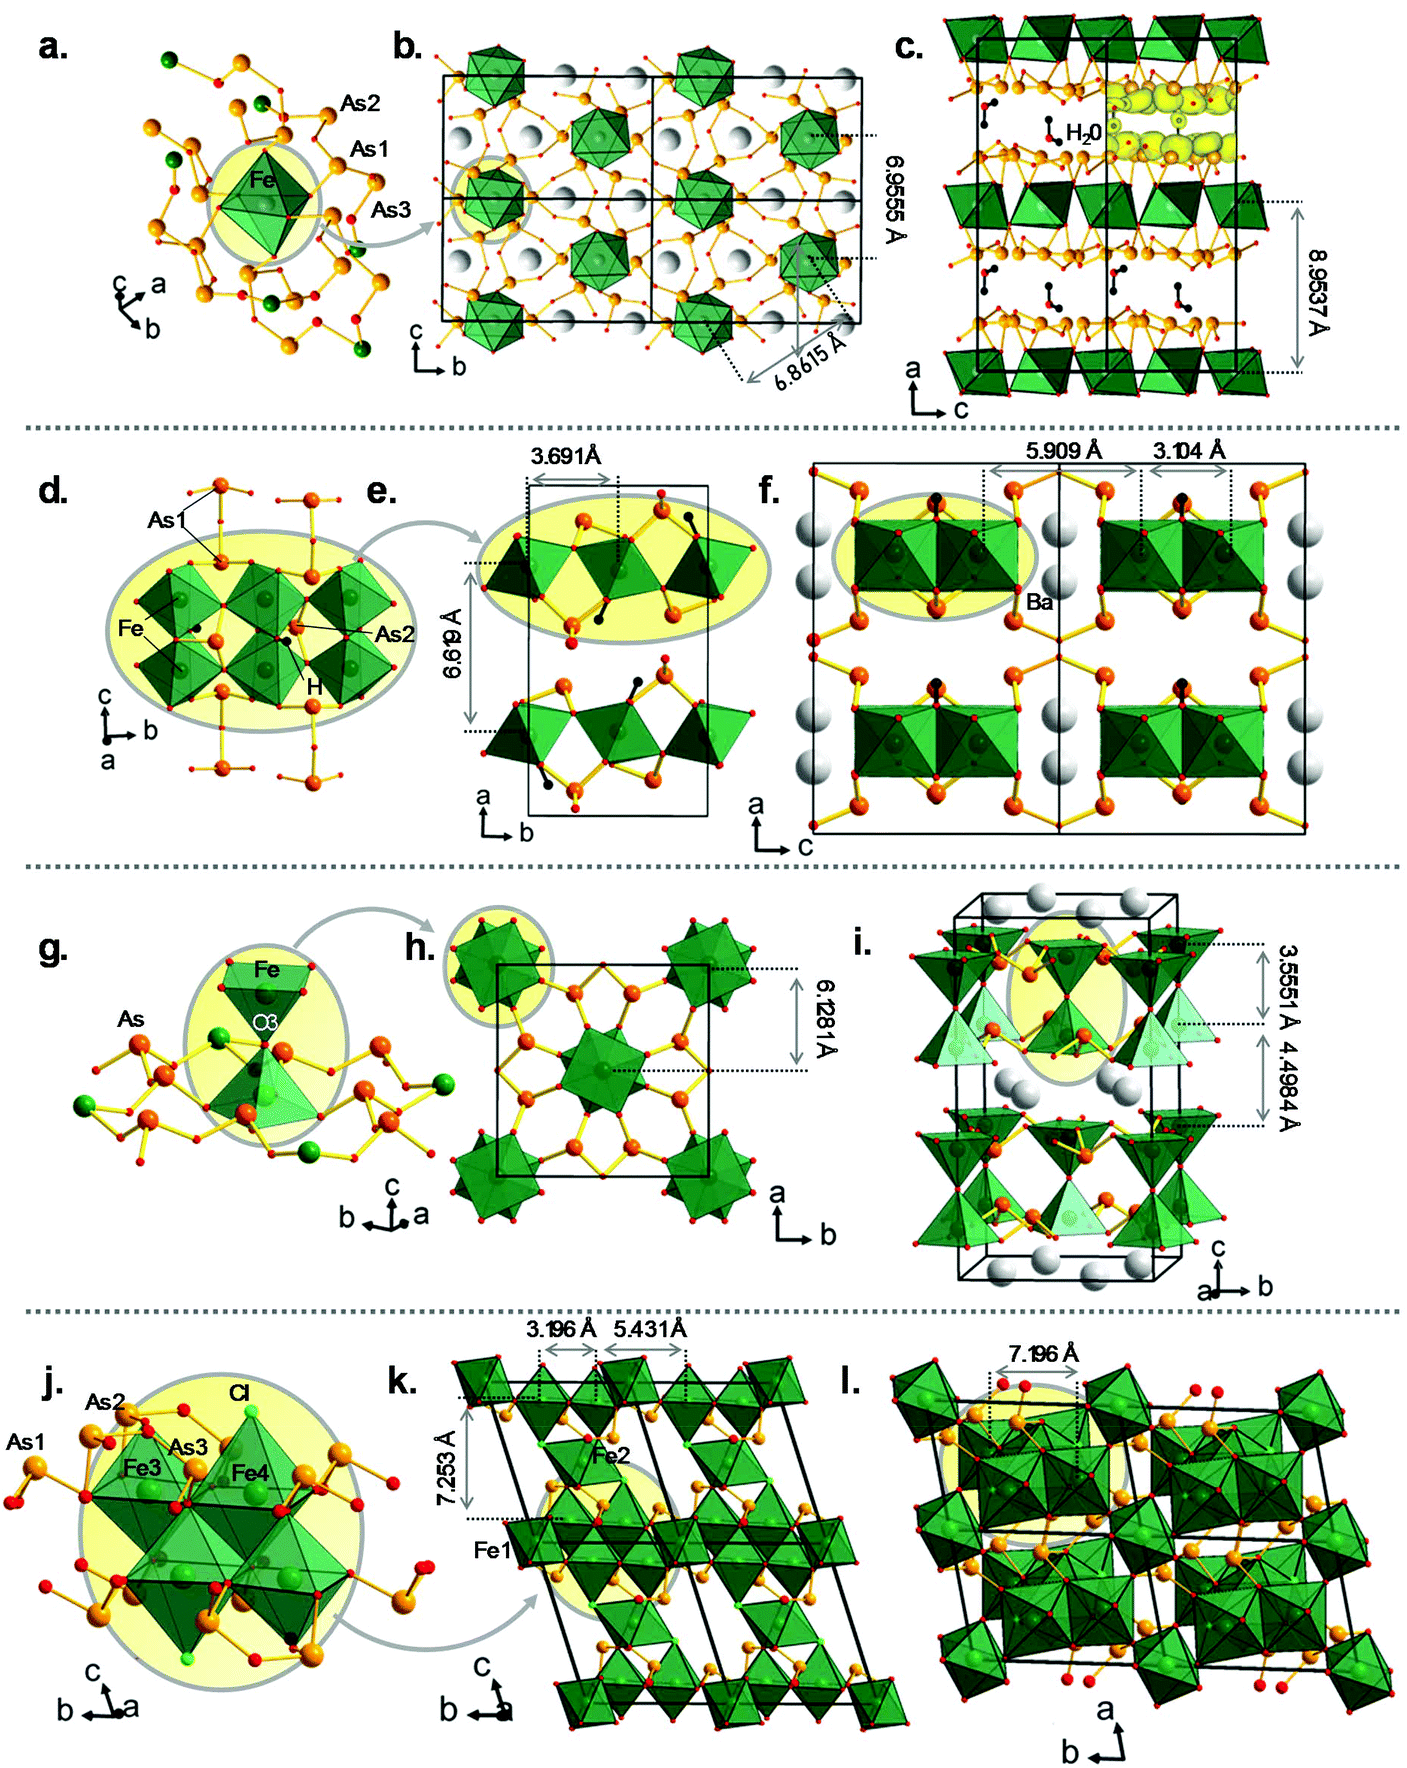 Synthesis Structure And Magnetic Behavior Of Iron Arsenites With Hierarchical Magnetic Units Inorganic Chemistry Frontiers Rsc Publishing Doi 10 1039 D0qi007g